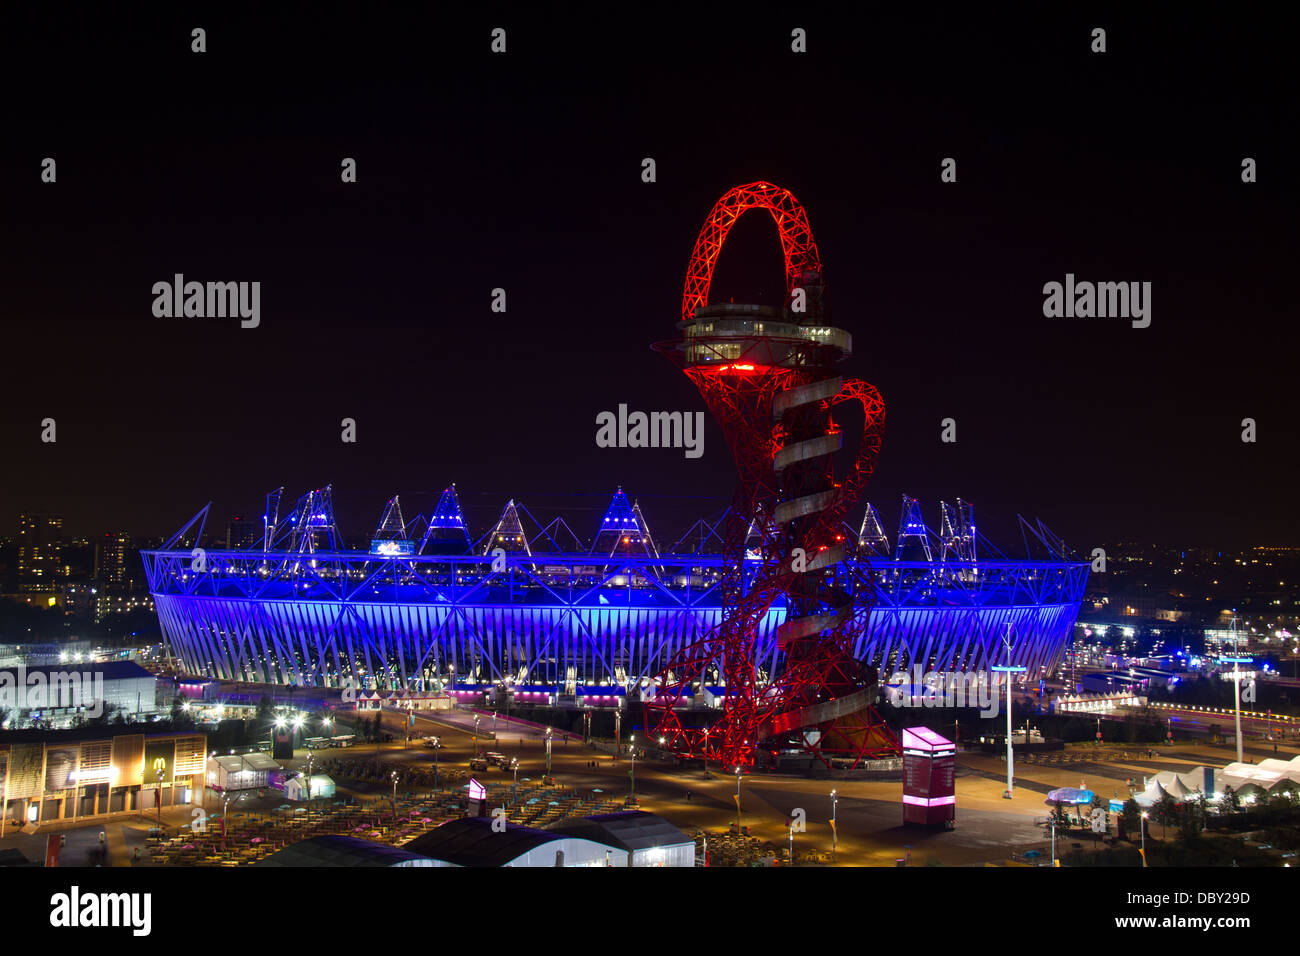 Opening Ceremony at the 2012 Paralympics, Queen Elizabeth Olympic Park, Stratford, London, United Kingdom Stock Photo